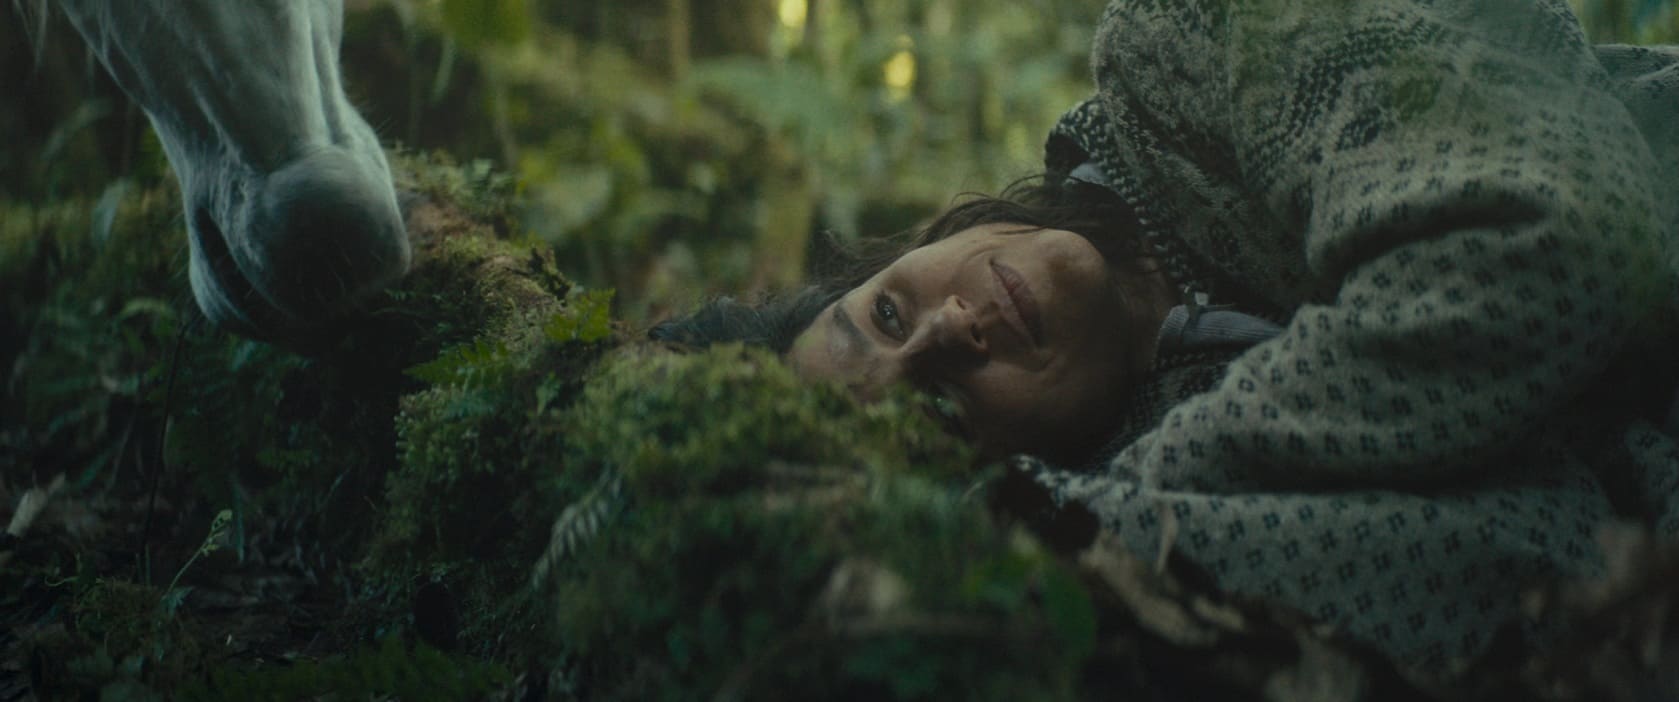 Clara lying down in the forest